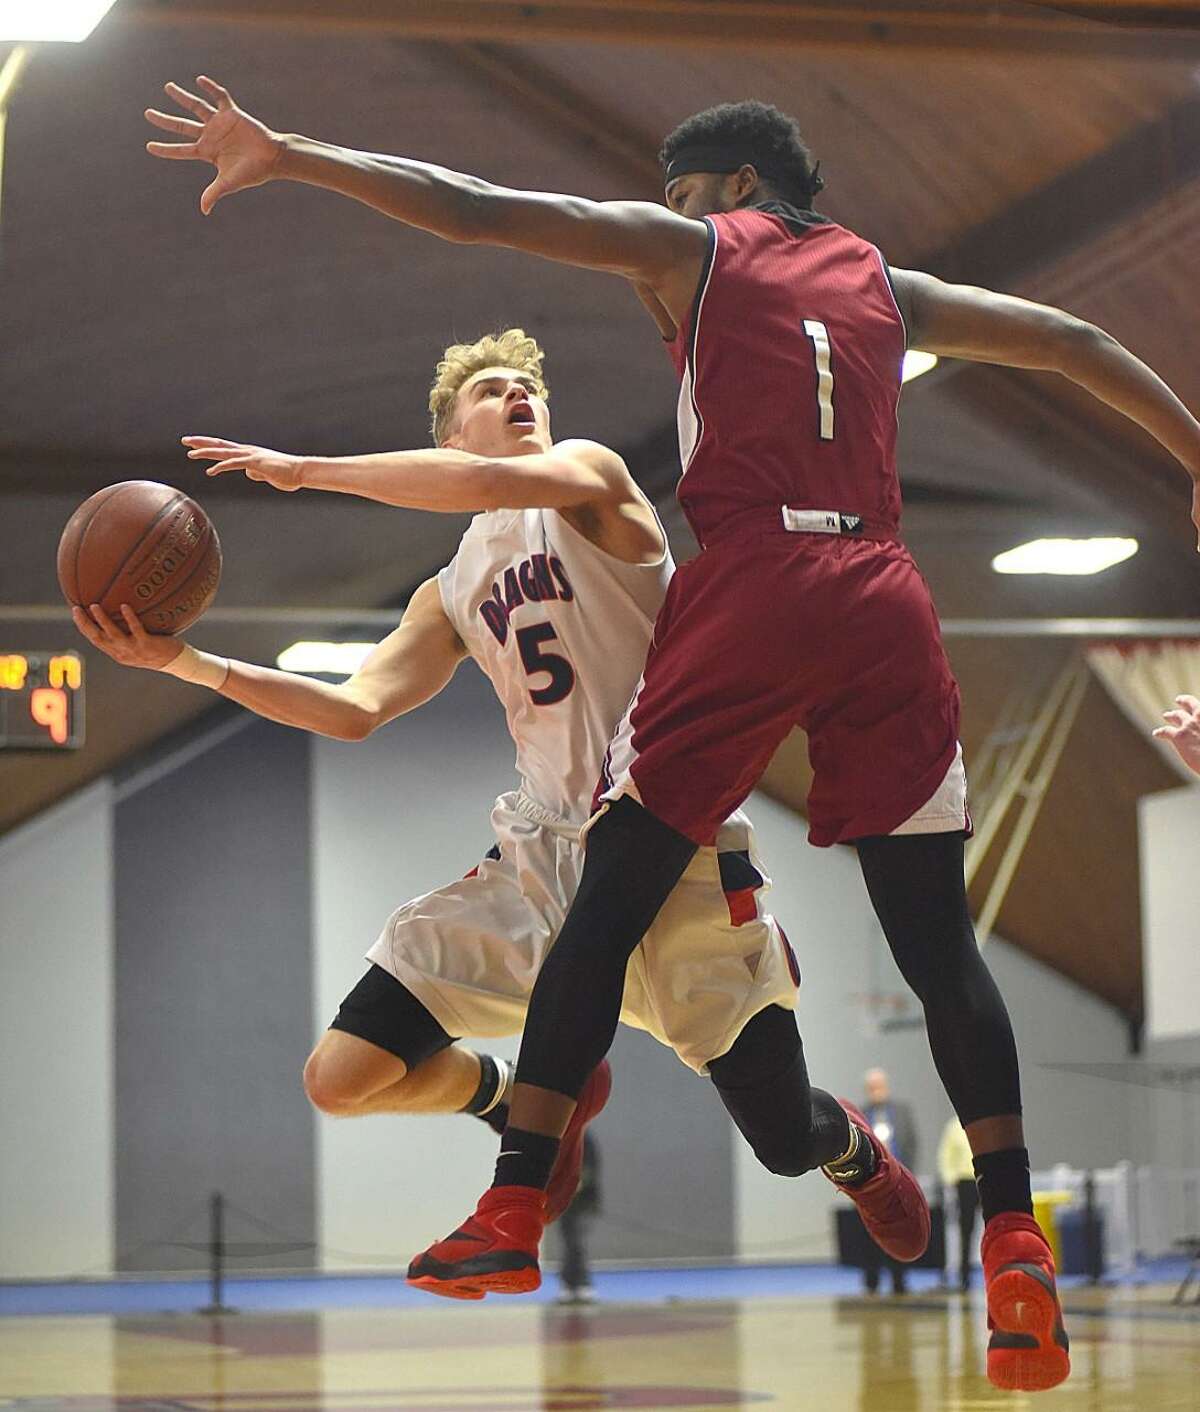 Cole Prowitt-Smith of GFA, left, puts up a shot against the defense of St. Luke’s Joel Boyce during Sunday’s NEPSAC Class C Championship game. St. Luke’s won the title with a 74-65 win.